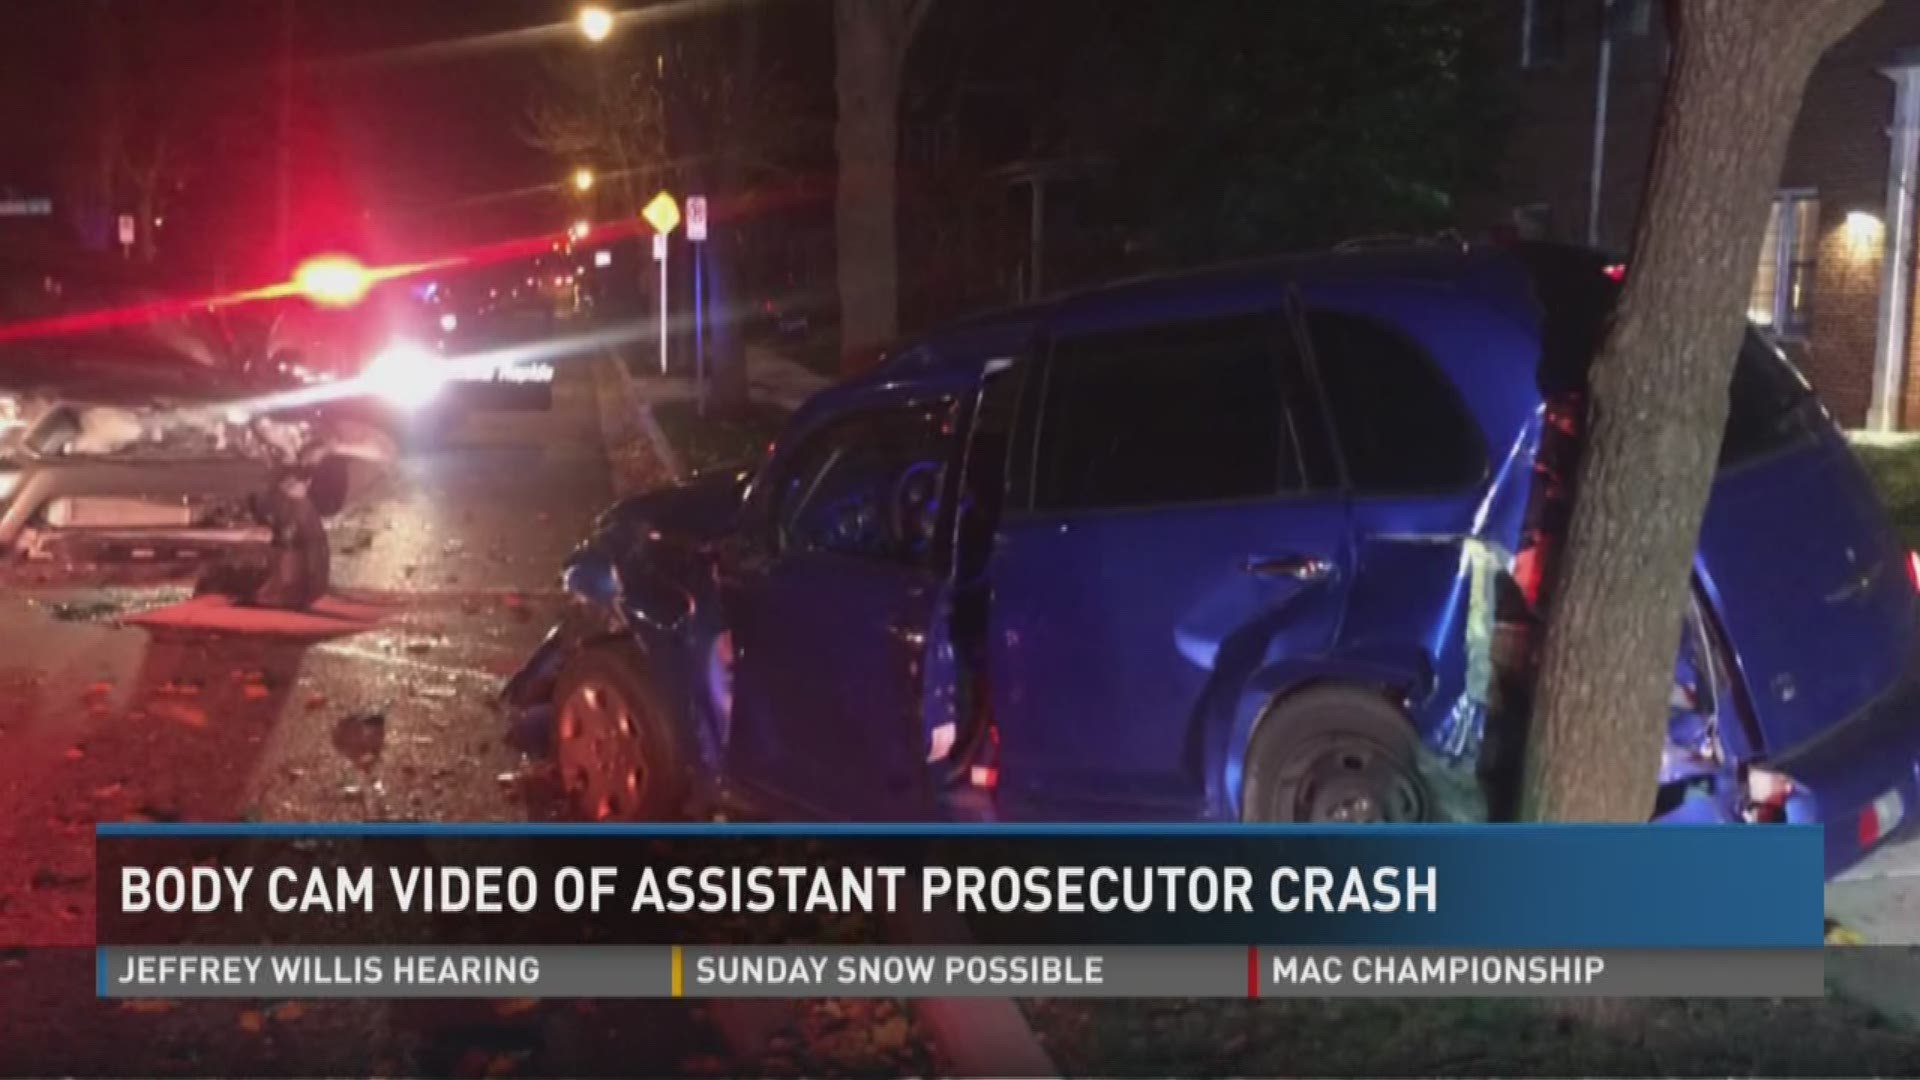 Grand Rapids Police to review officer's handling of Assistant Prosecutor's crash